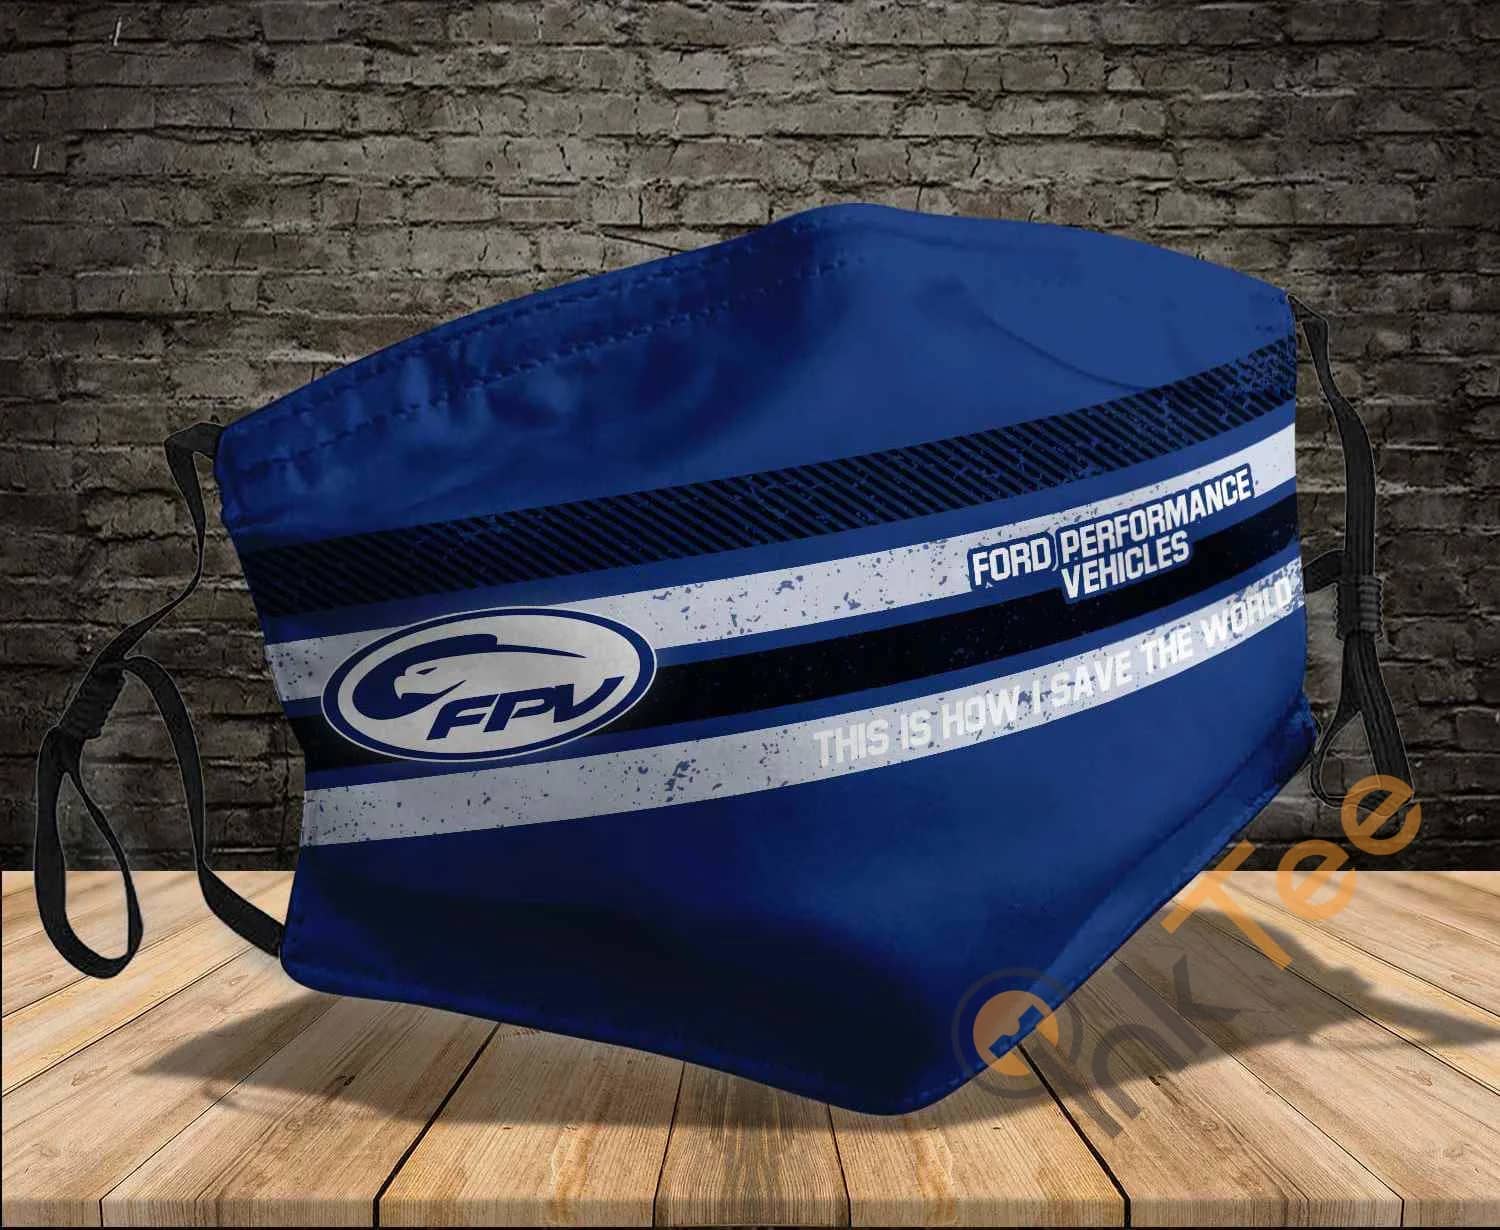 Ford Performance Vehicles This Is How I Save The World Sku 1472 Amazon Best Selling Face Mask